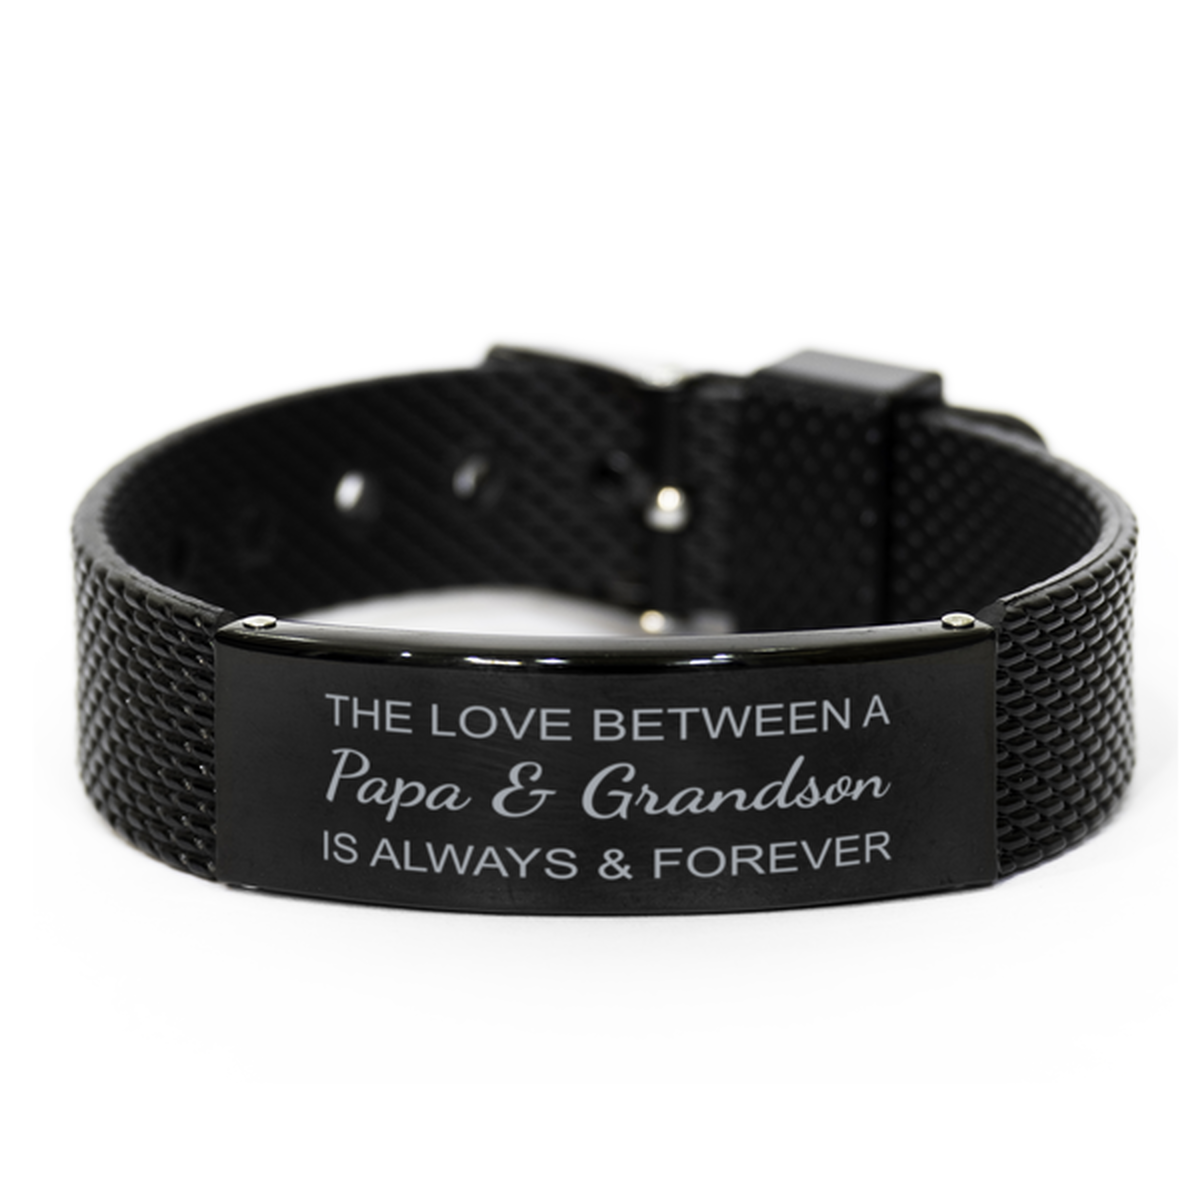 The Love Between a Papa and Grandson is Always and Forever Bracelet, Papa Grandson Bracelet, Black Stainless Steel Leather Bracelet, Christmas.